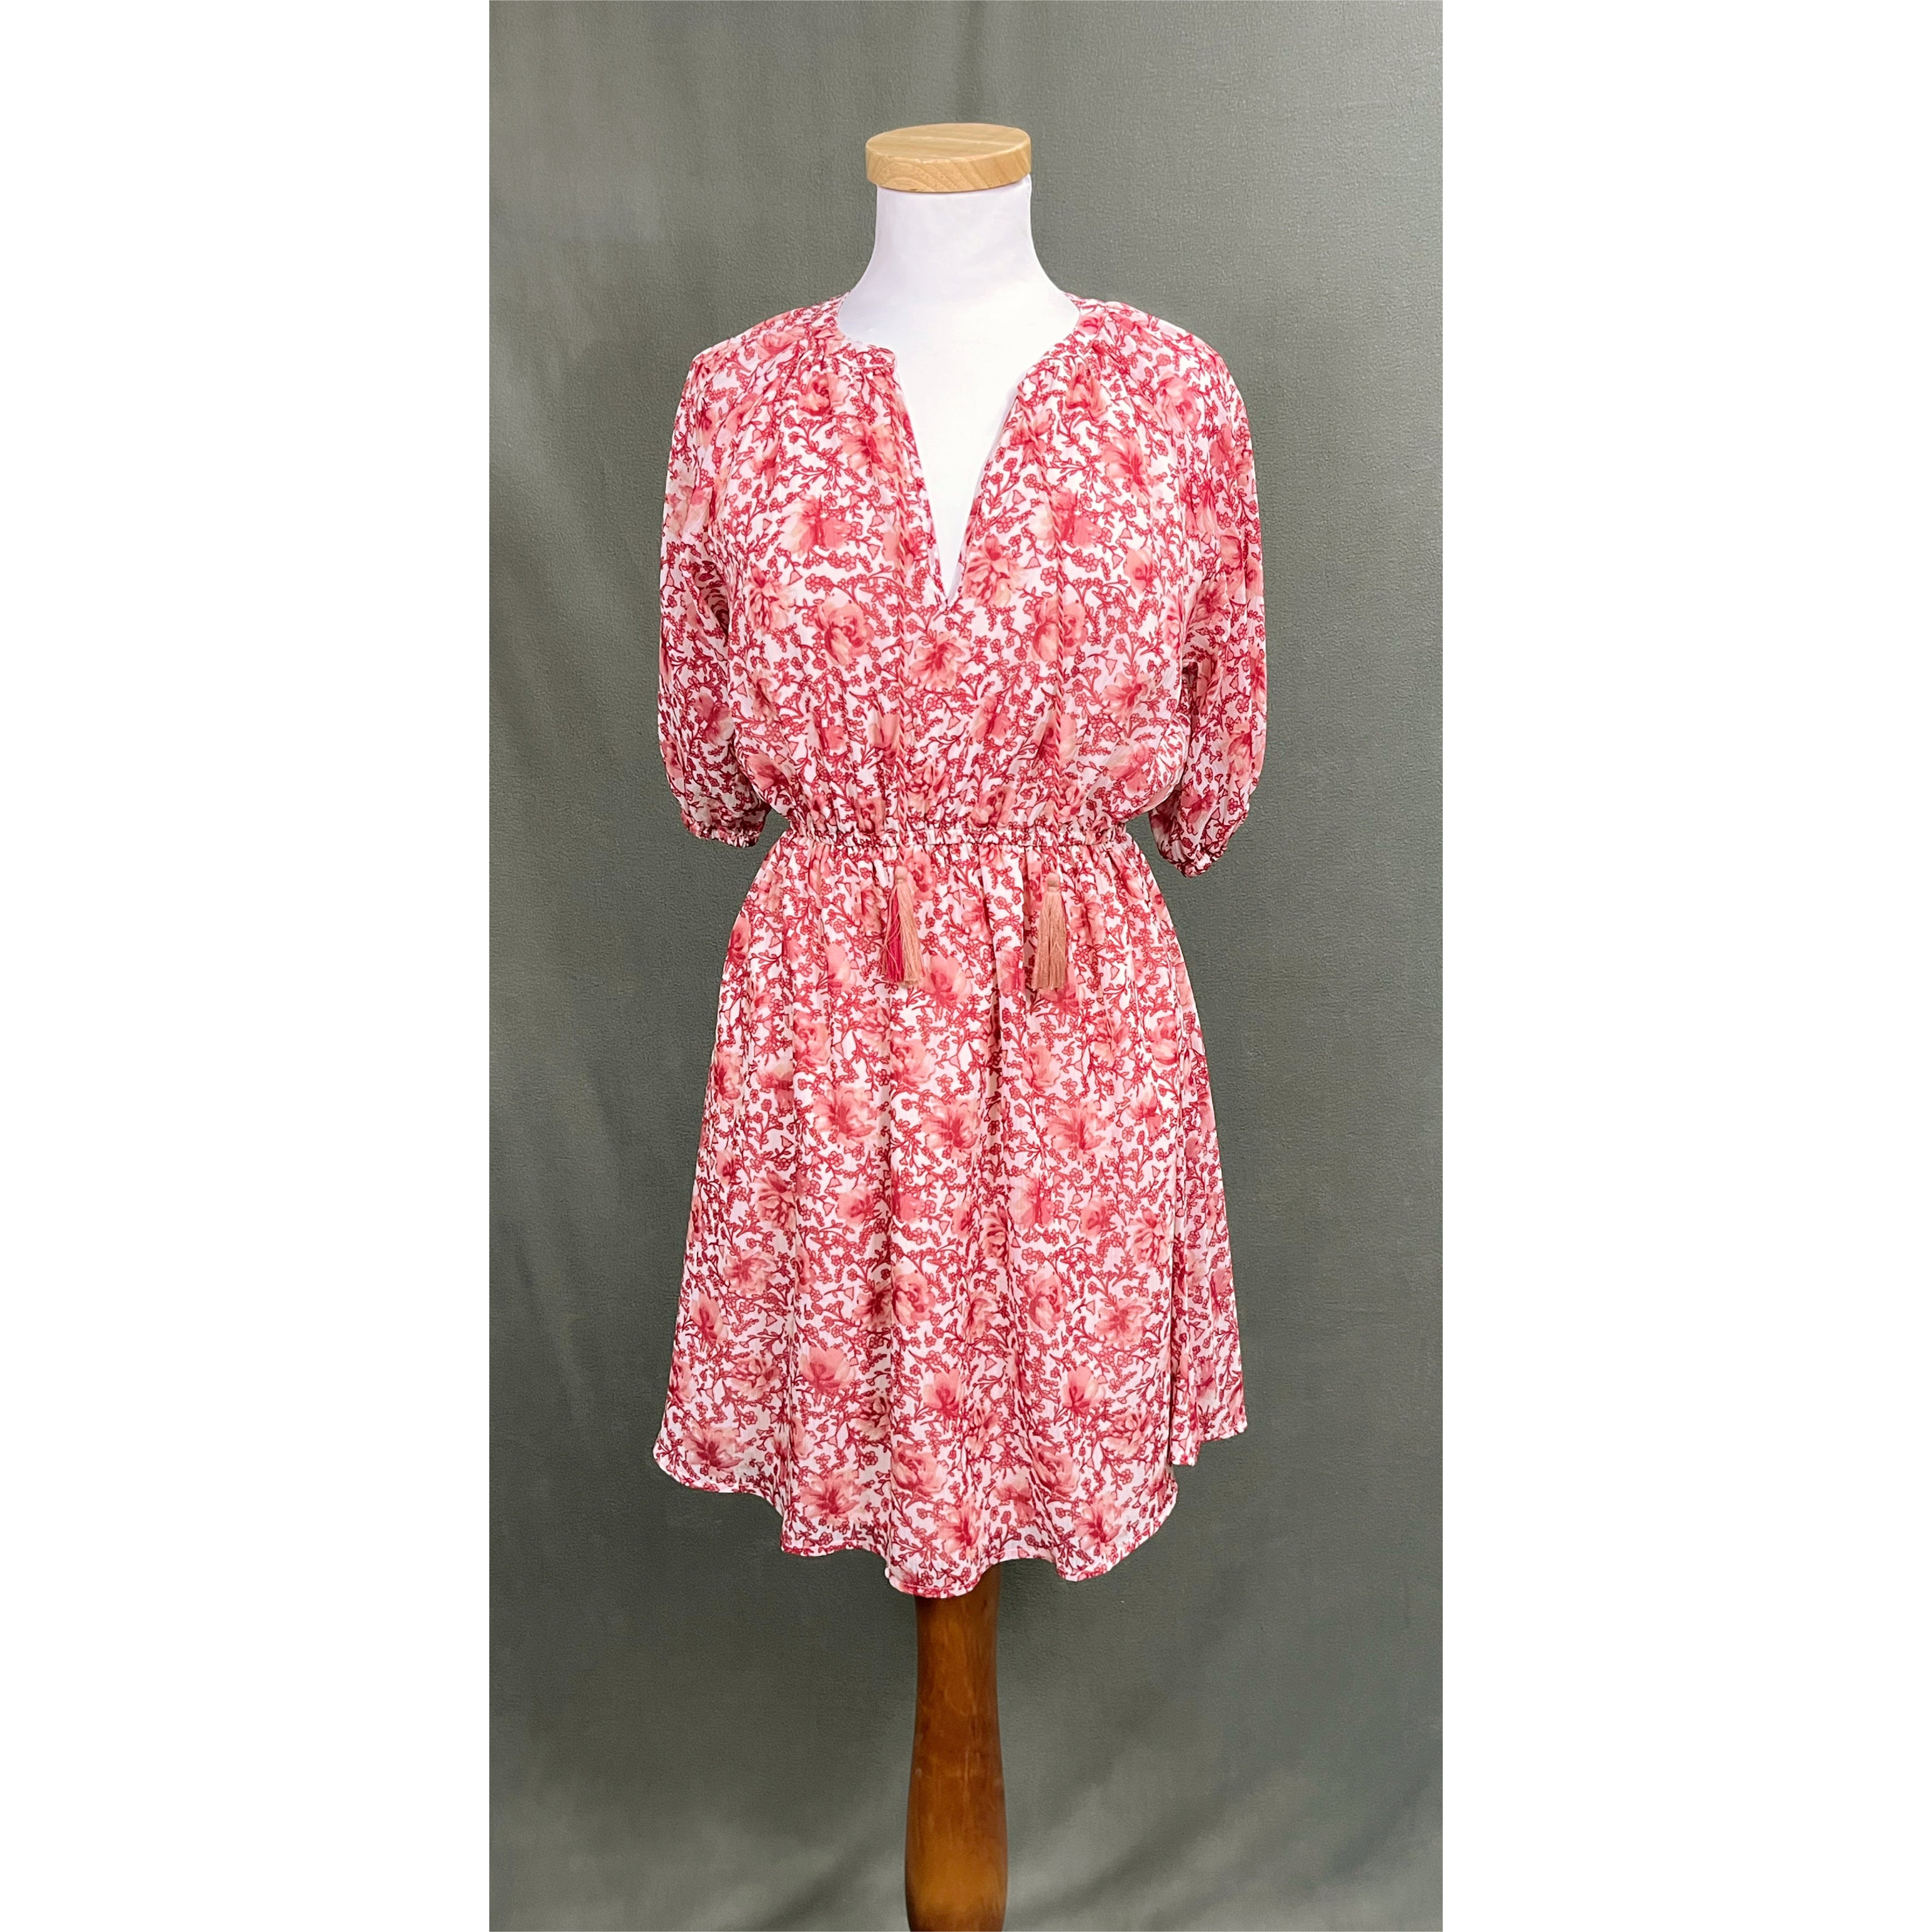 BB Dakota rose floral dress, size XS, NEW WITH TAGS!